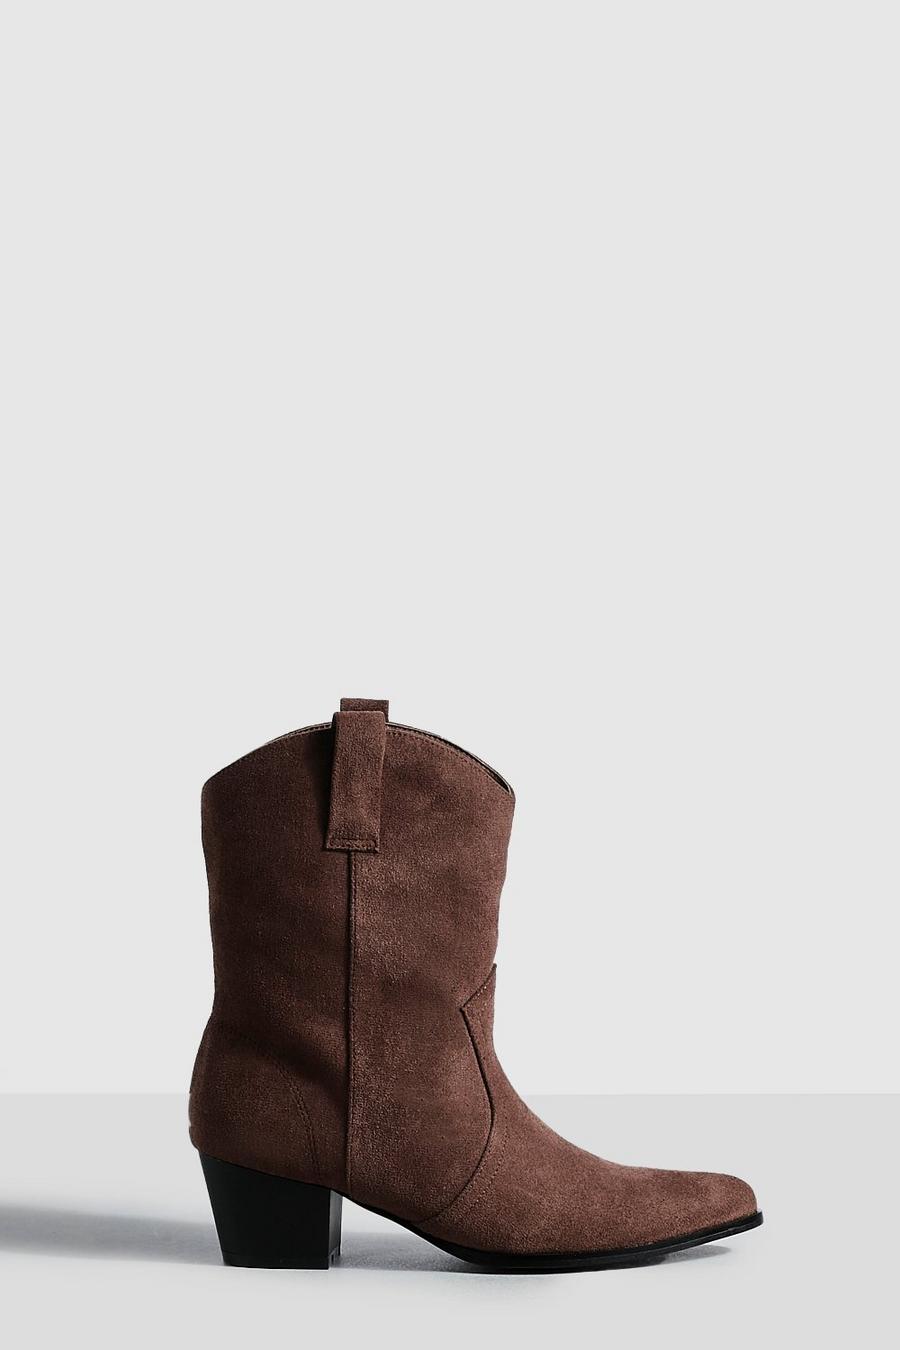 Chocolate brown Basic Tab Detail Western Cowboy Ankle Boots